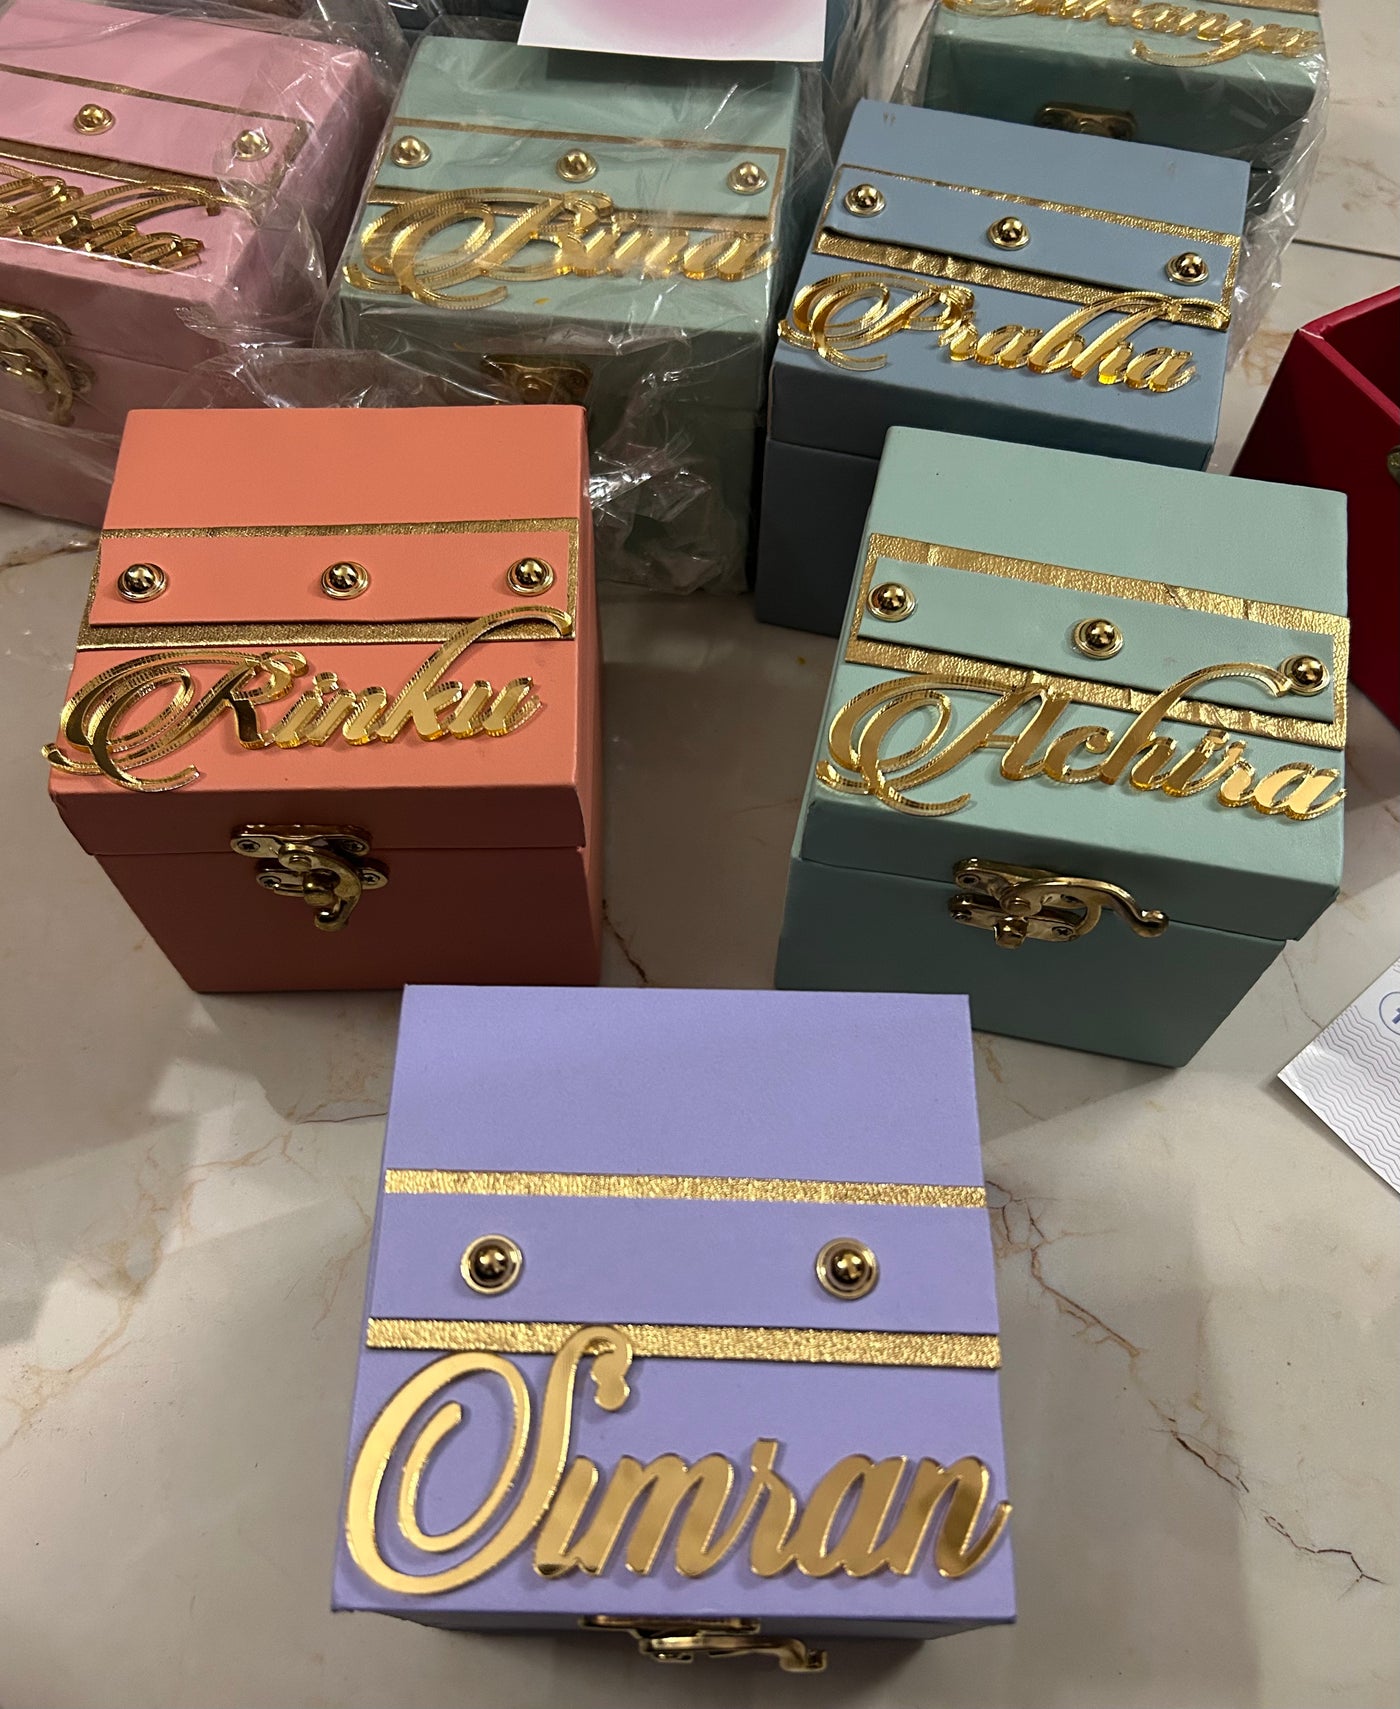 LAMANSH® ( 4*4 inch ) Customized Leather mini trunk boxes for gifting 🎁 / small leatherite lock boxes for birthday return gifts & wedding favors with Name plates